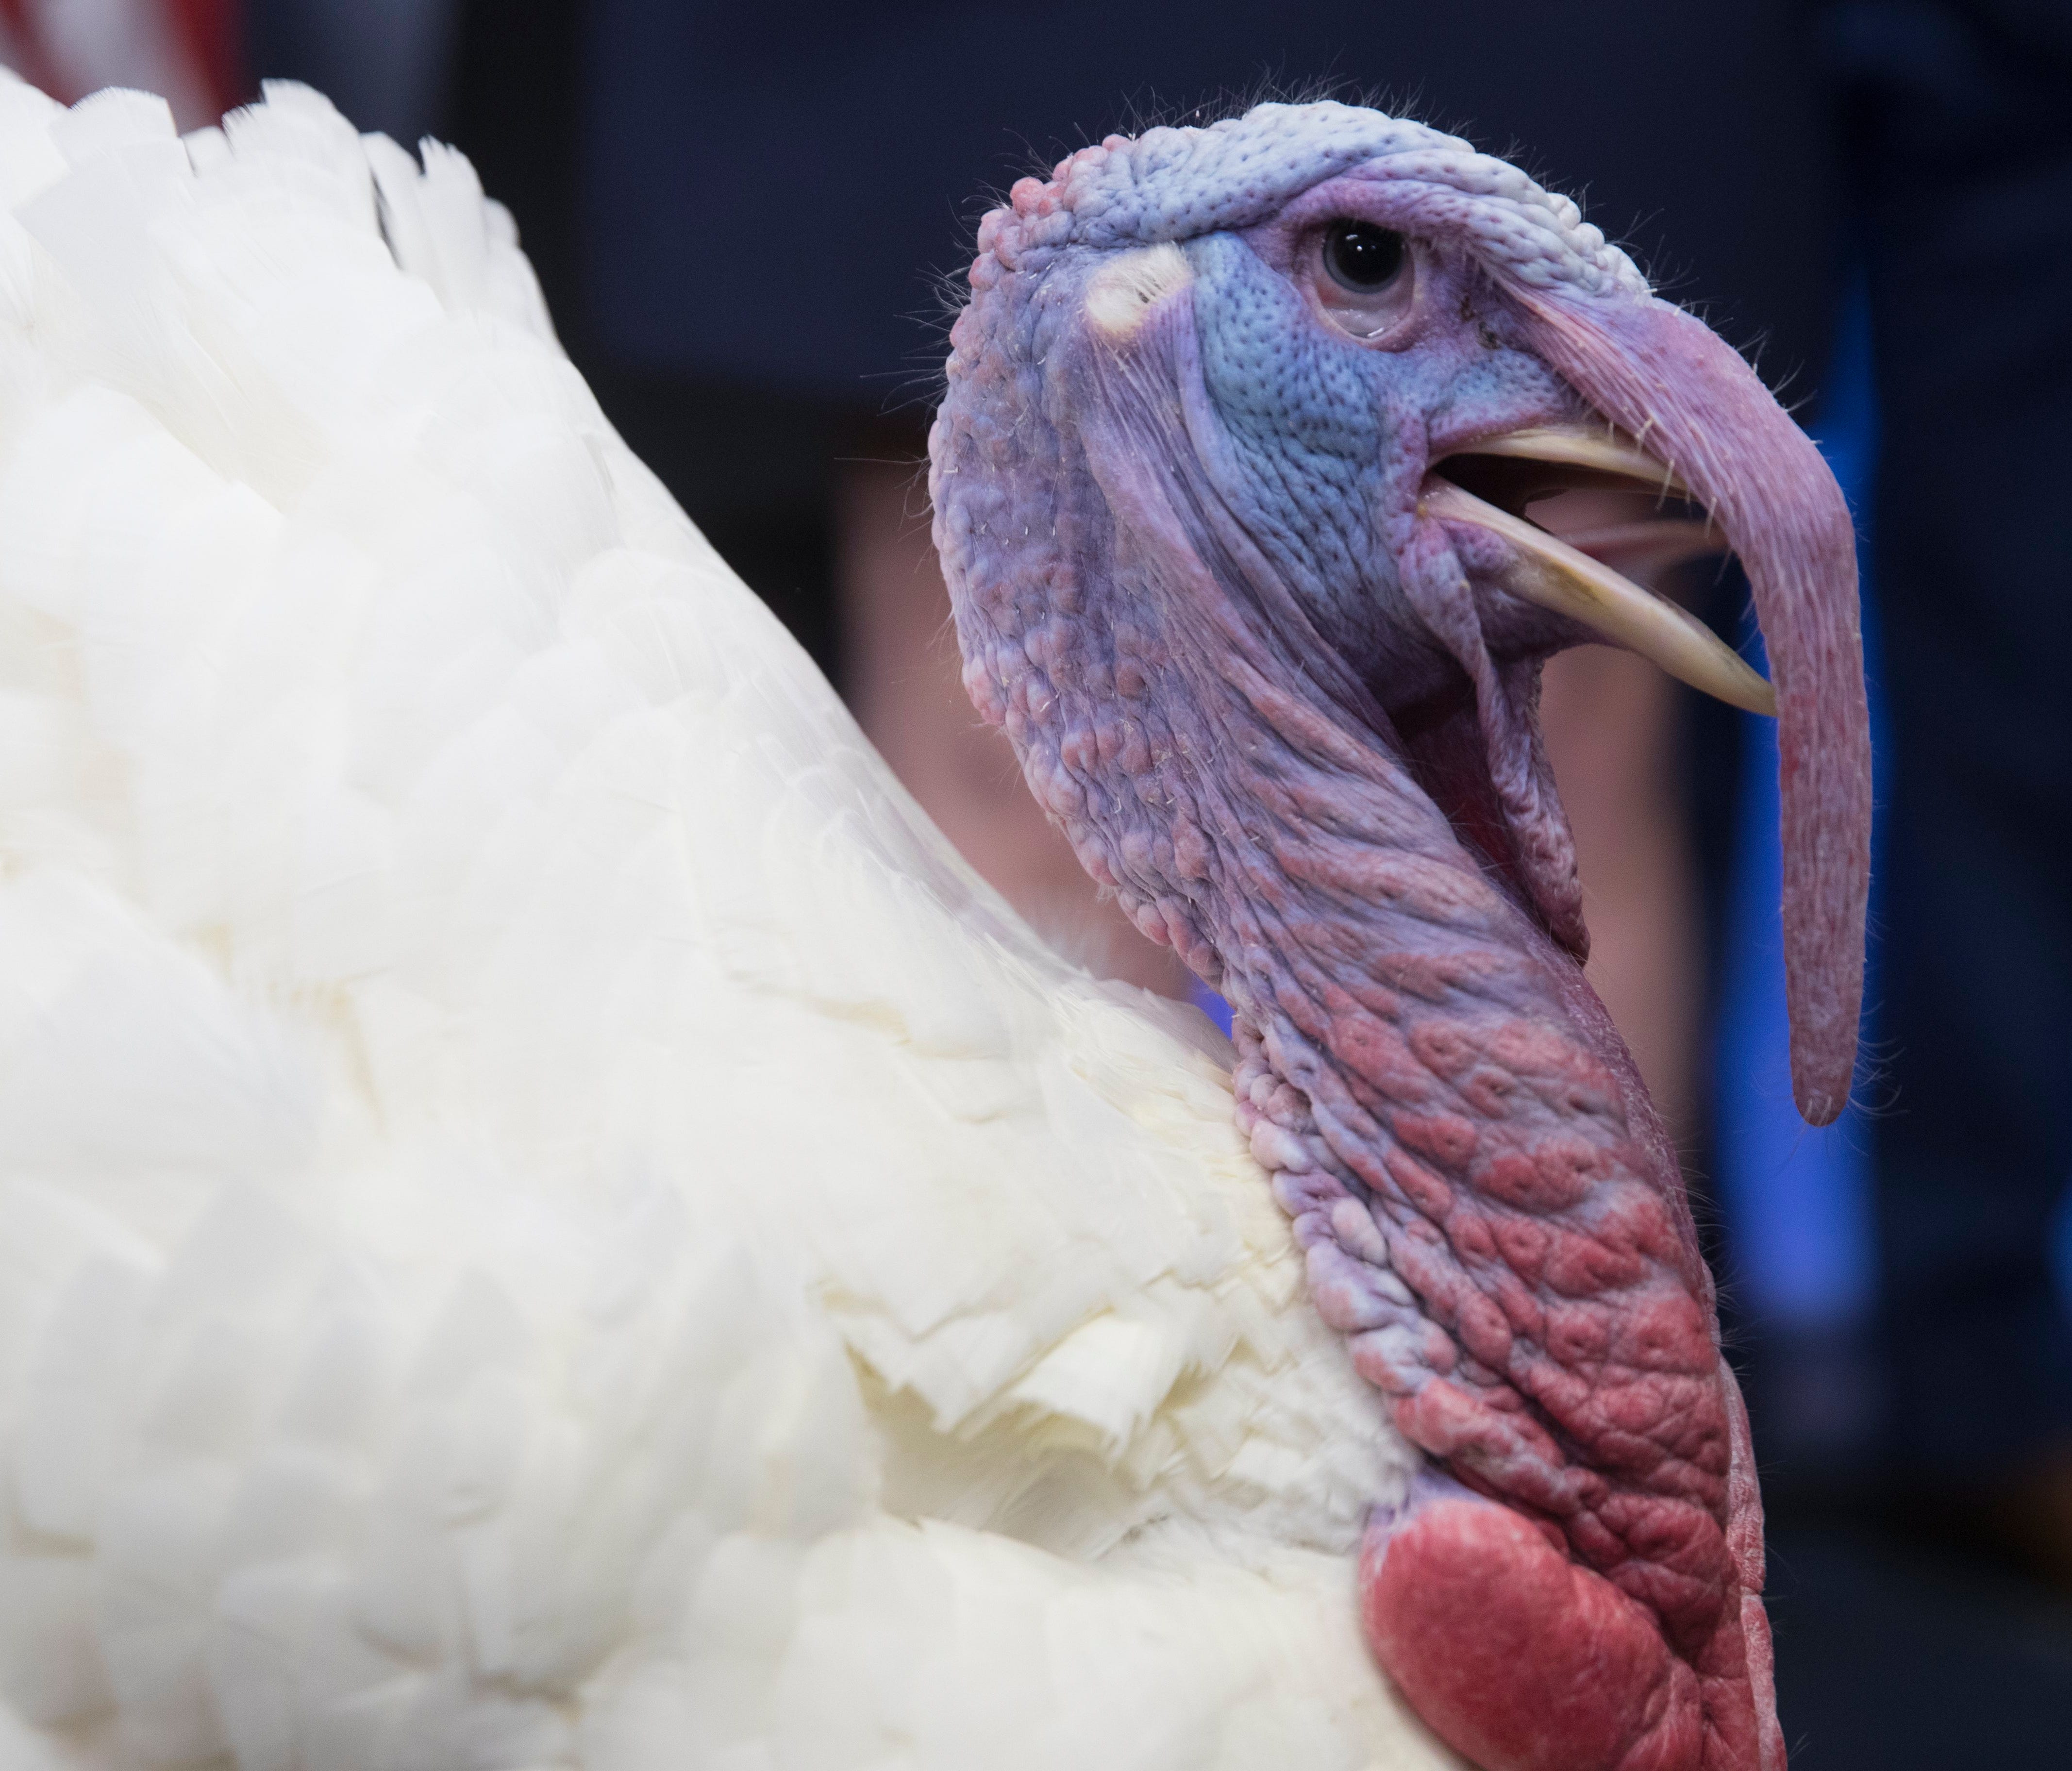 'Wishbone', a turkey that will be pardoned by US President Donald Trump in the 70th National Thanksgiving Turkey Pardoning Ceremony, visits the James Brady Press Briefing Room at the White House in Washington, D.C. on Nov. 21, 2017.